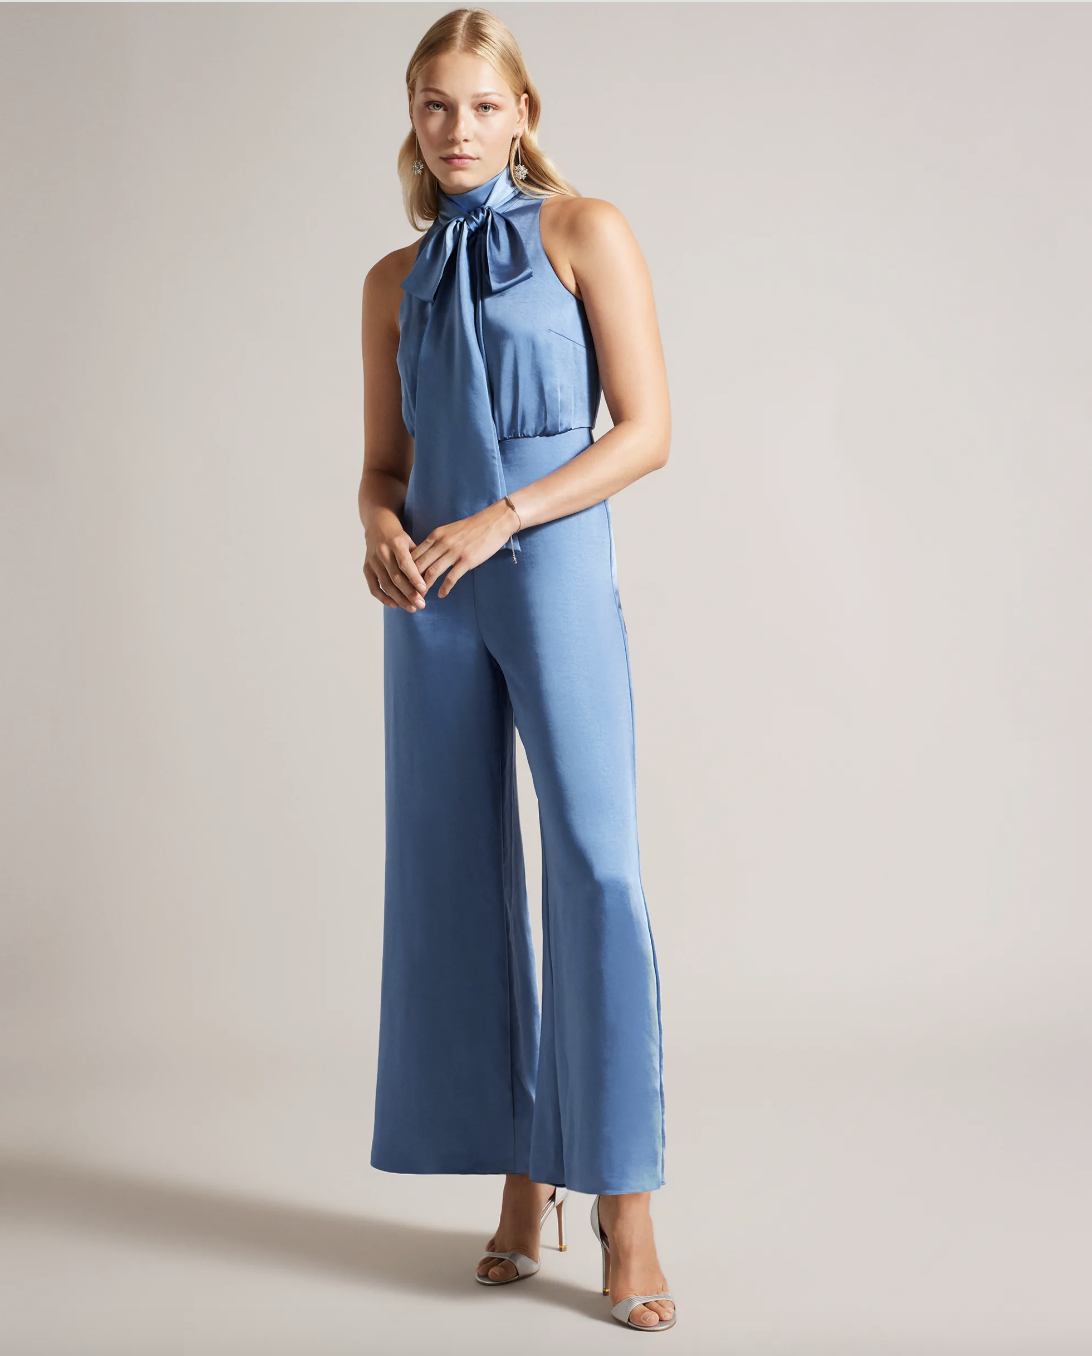 <p><strong>£112.00</strong></p><p><a href="https://www.tedbaker.com/uk/p/Womens/Clothing/Jumpsuits-and-Playsuits/AMBRIAA-Satin-Pussybow-Jumpsuit-Blue/271813-BLUE">Shop Now</a></p><p>We think Ted Baker's blue satin jumpsuit is beyond perfect for upcoming spring/summer weddings. If you're a guest opt for tousled waves and metallic accessories, or bridesmaids can rock sleek low buns. </p>